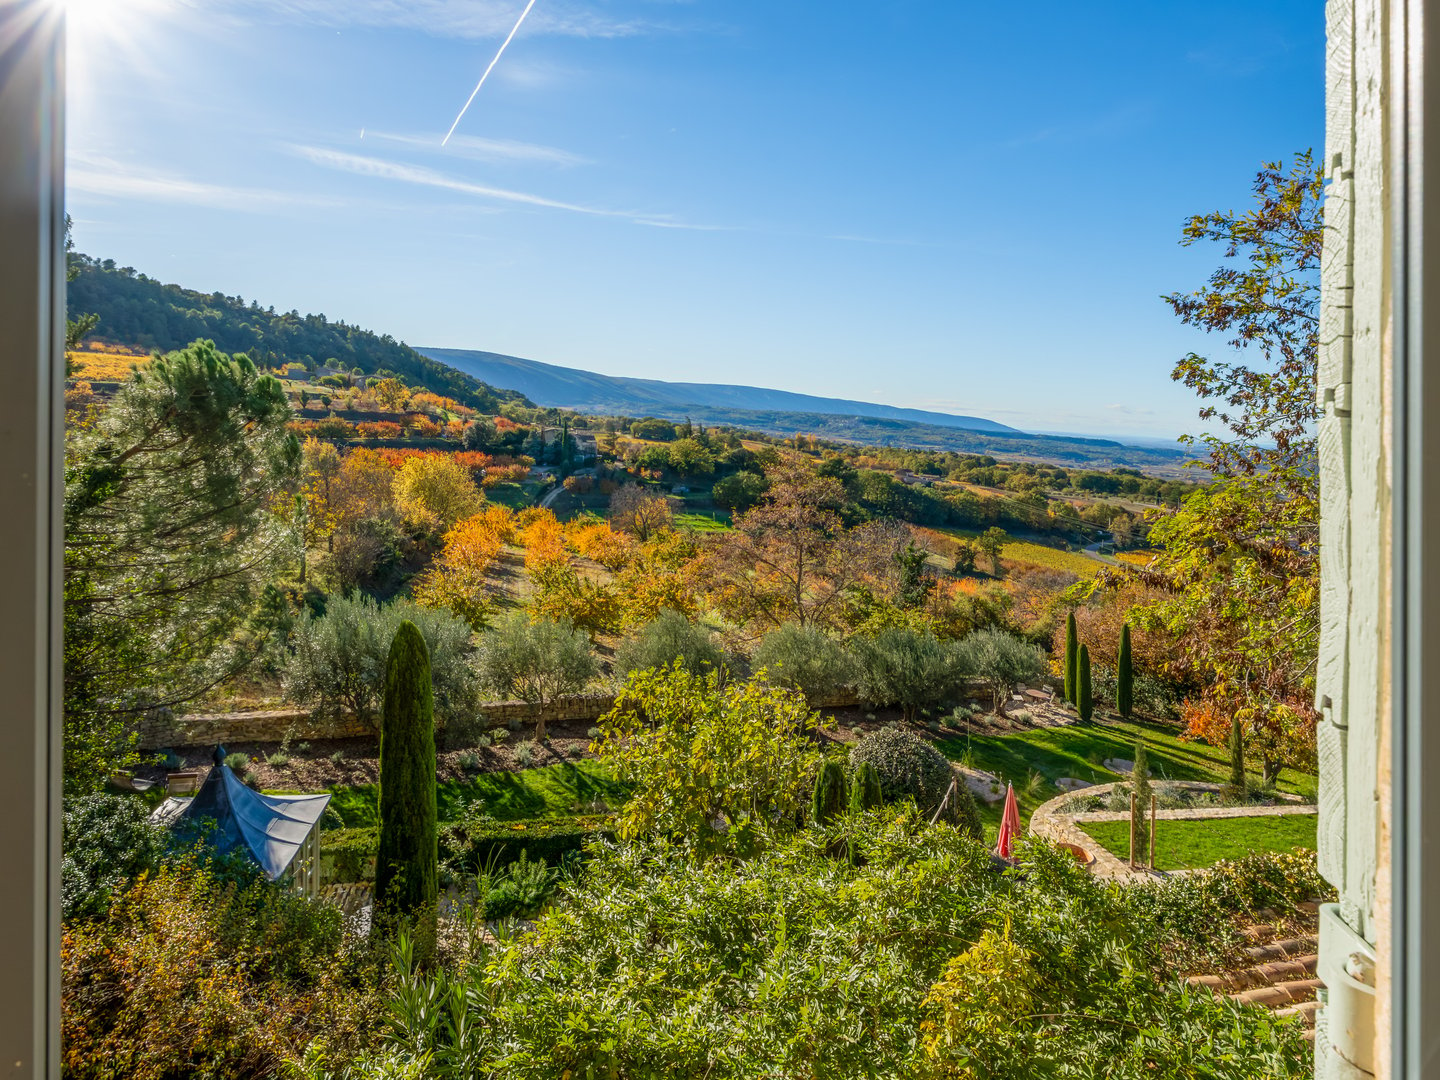 18th century Bastide with views of Luberon for sale - Bonnieux - 39